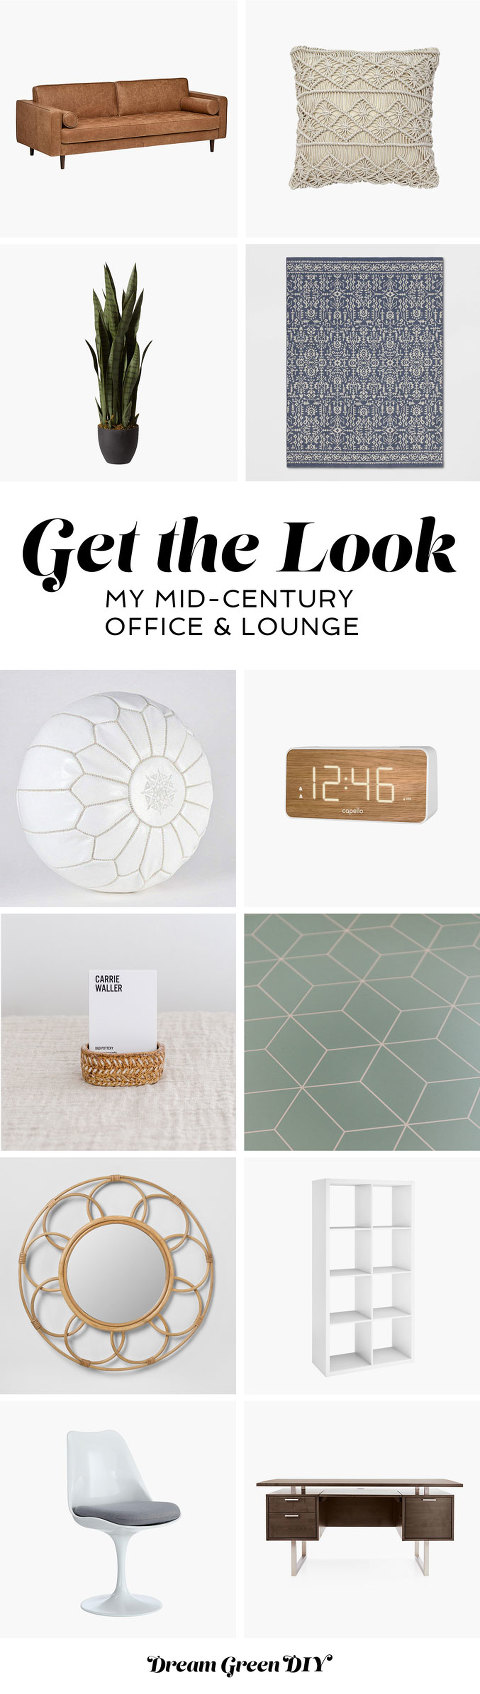 Get The Look Of My Mid-Century Office